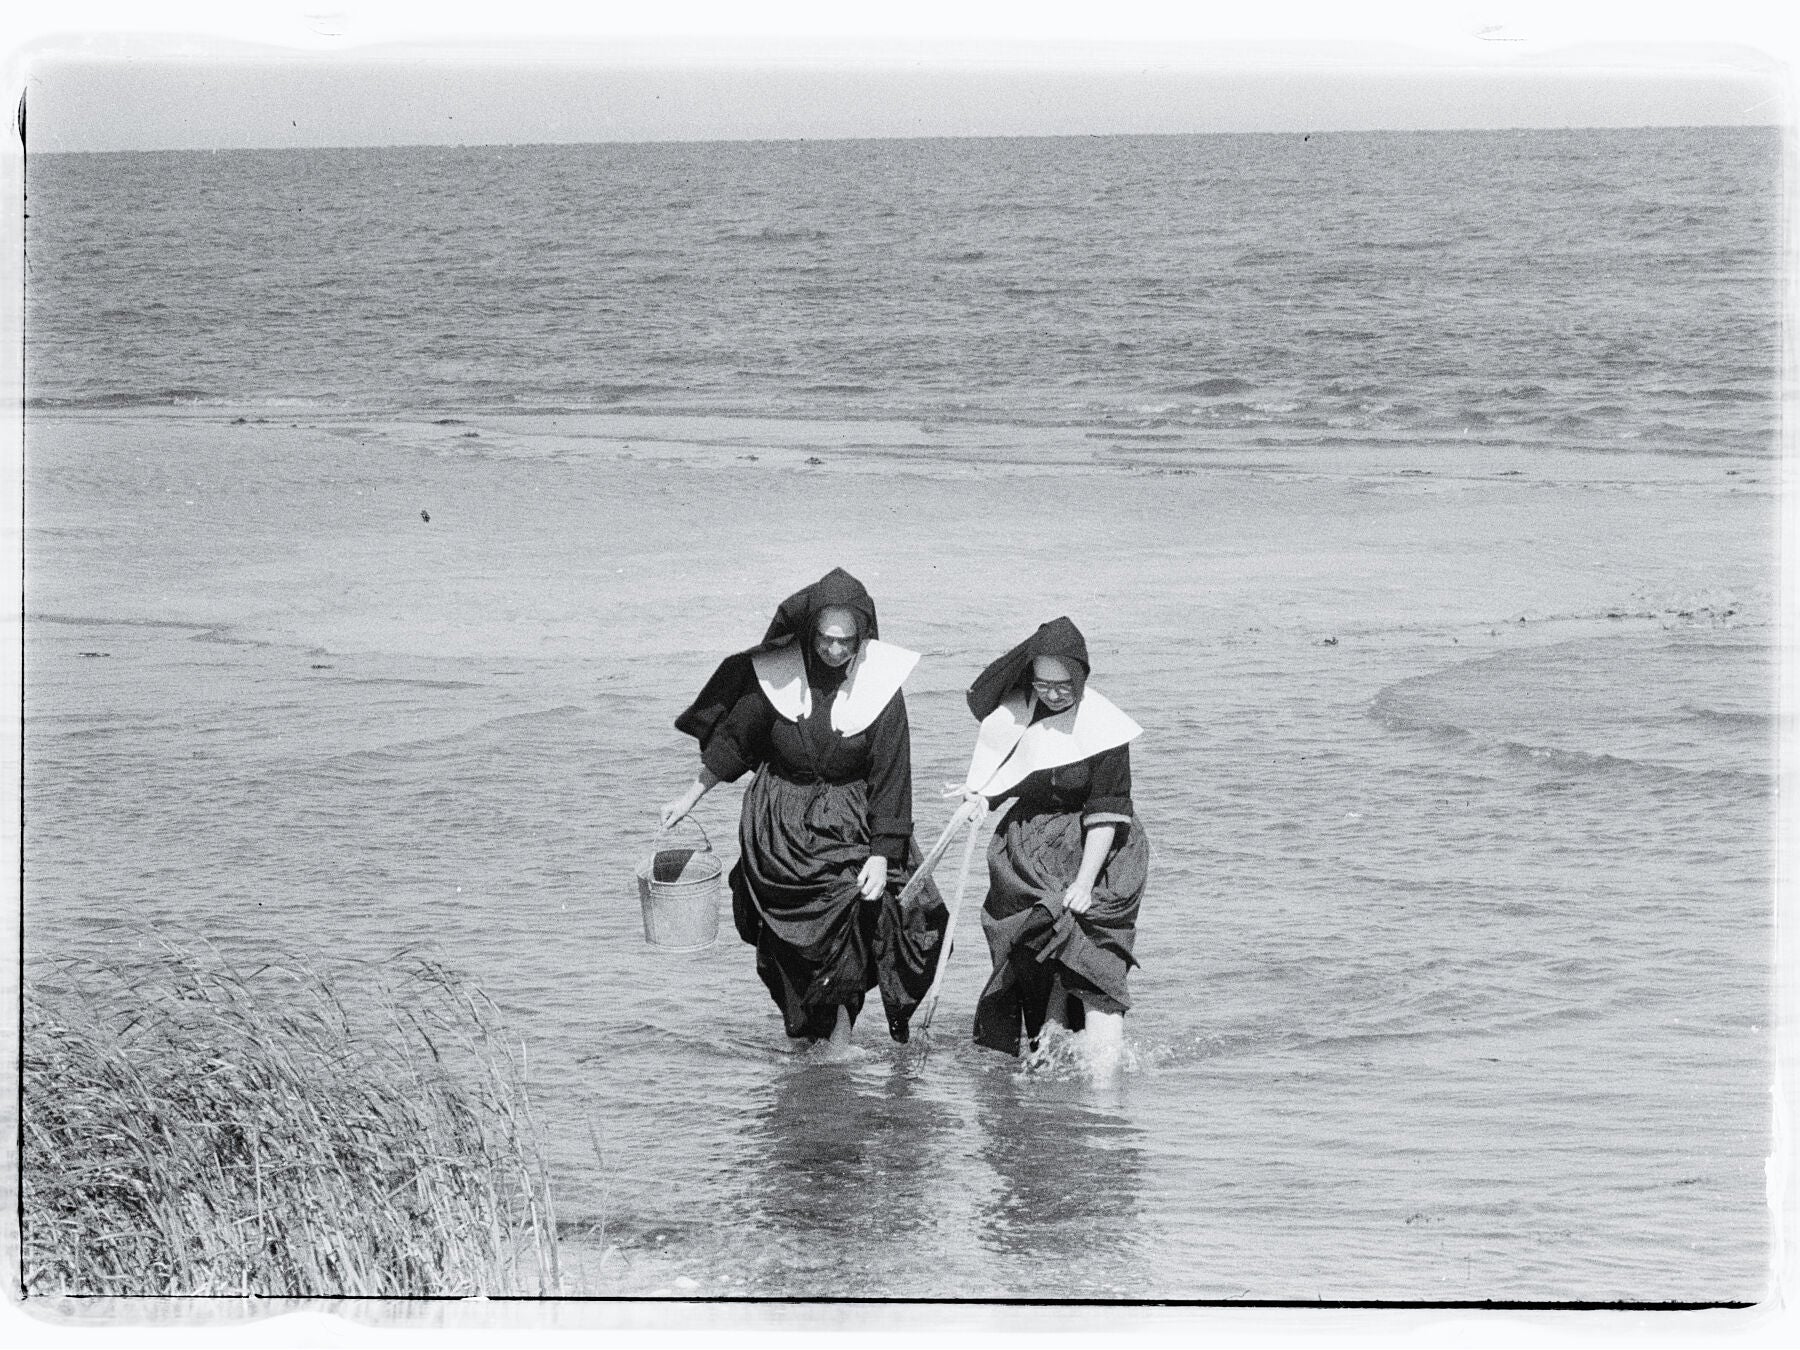 Nuns Clamming on Long Island by Toni Frissell 0- September 1957